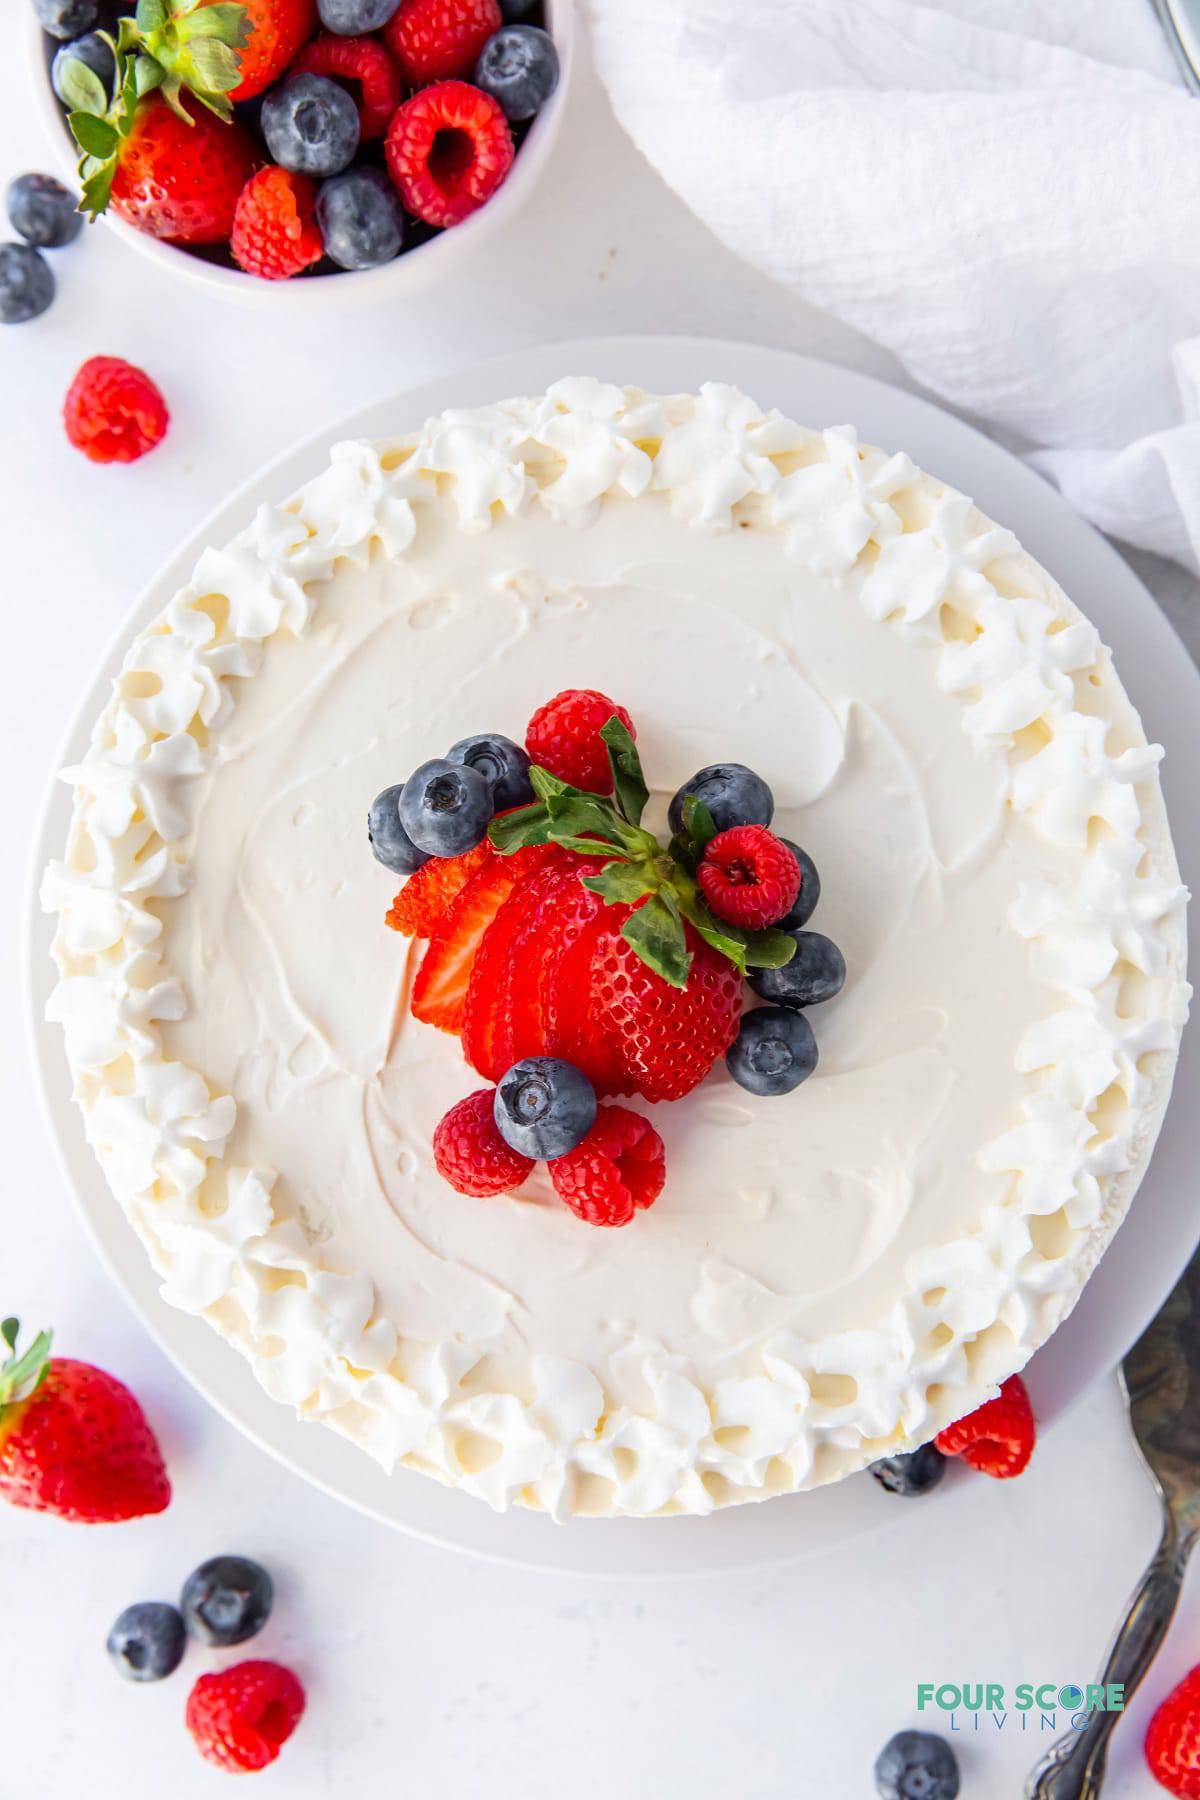 a whole keto no bake cheesecake. the top is decorated with whipped cream around the edges and fresh berries piled in the center. Image is taken from above